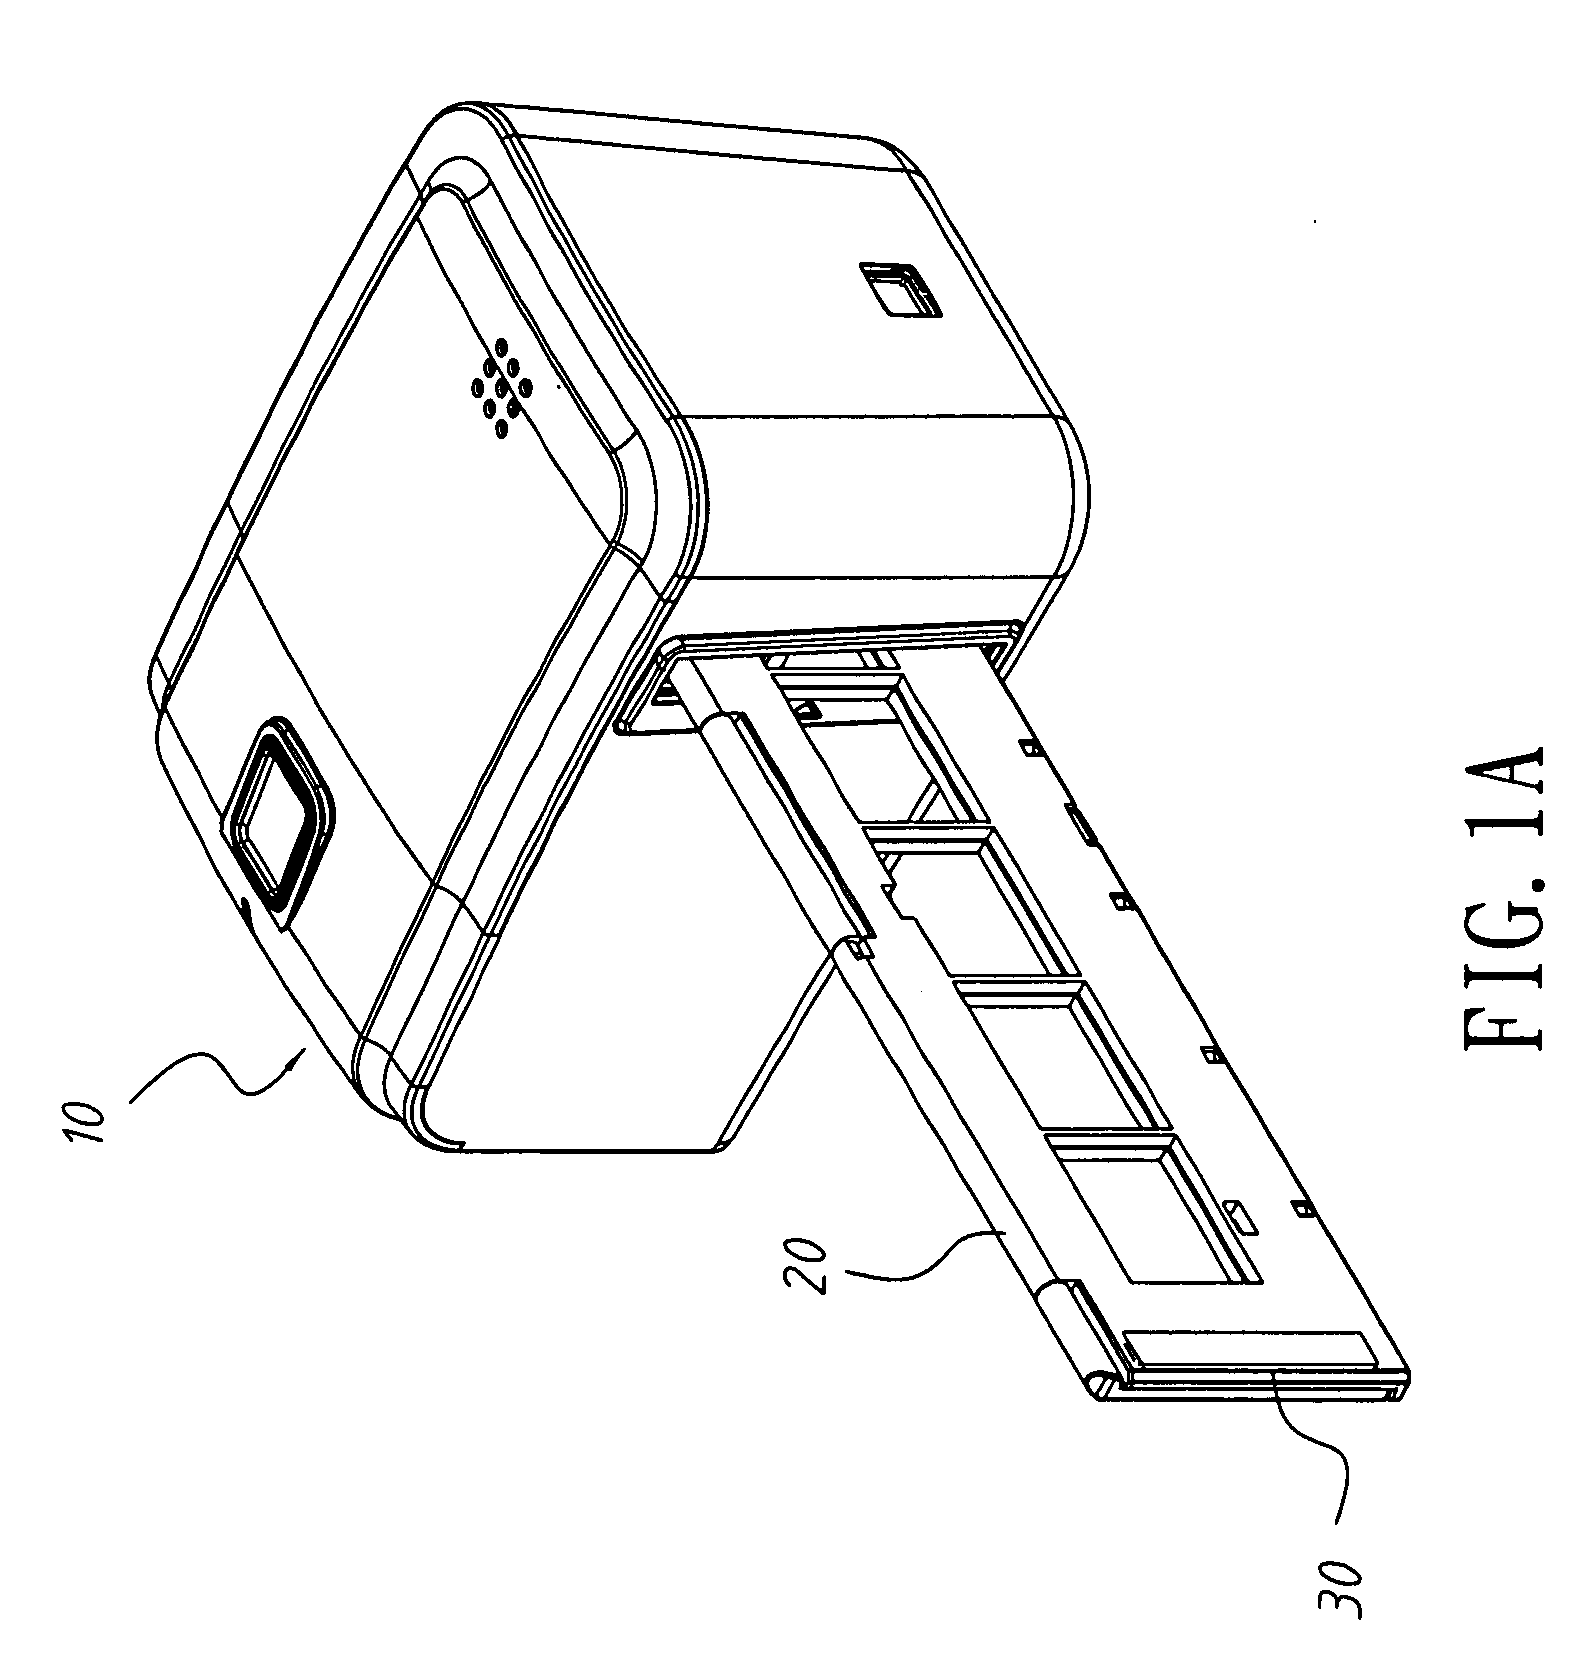 Automatic dust-removing filmscanner